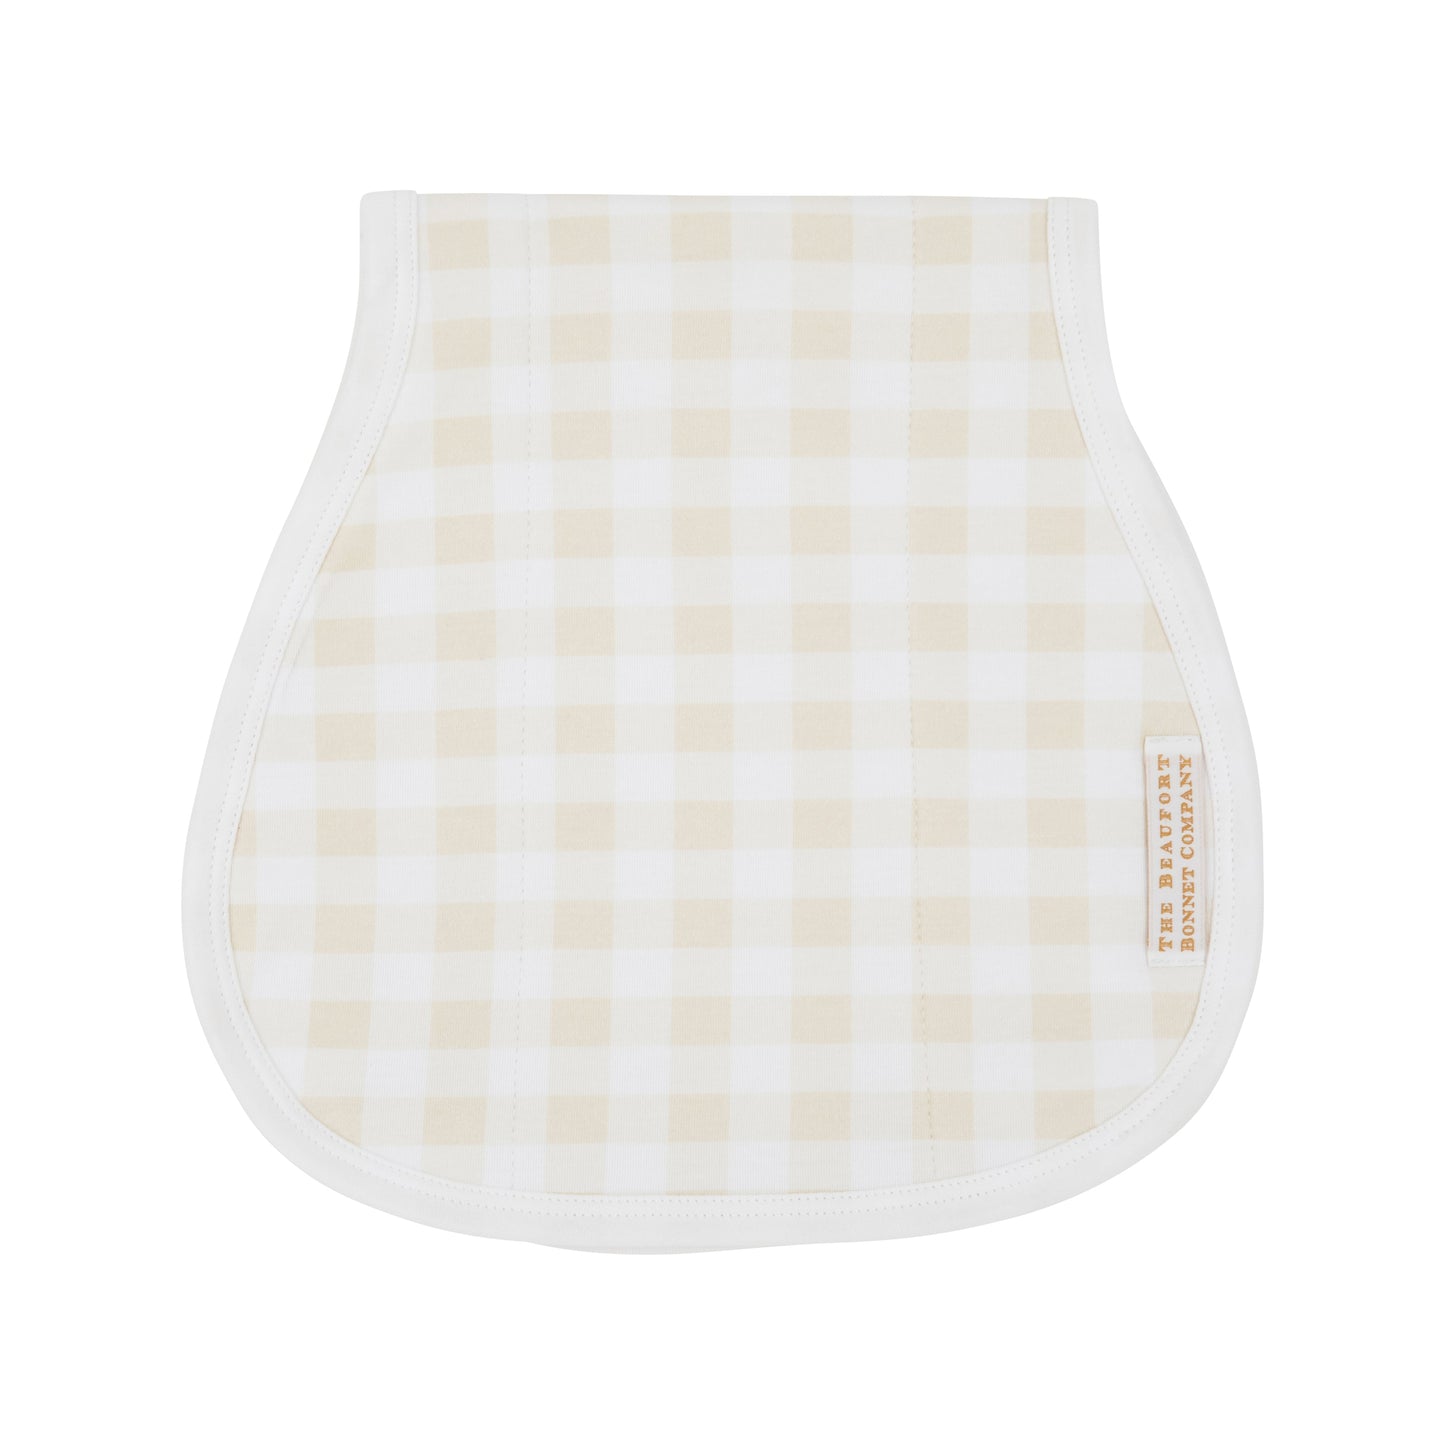 The Beaufort Bonnet - Oopsie Daisy Burp Cloth Palmetto Pearl Gingham With Worth Avenue White